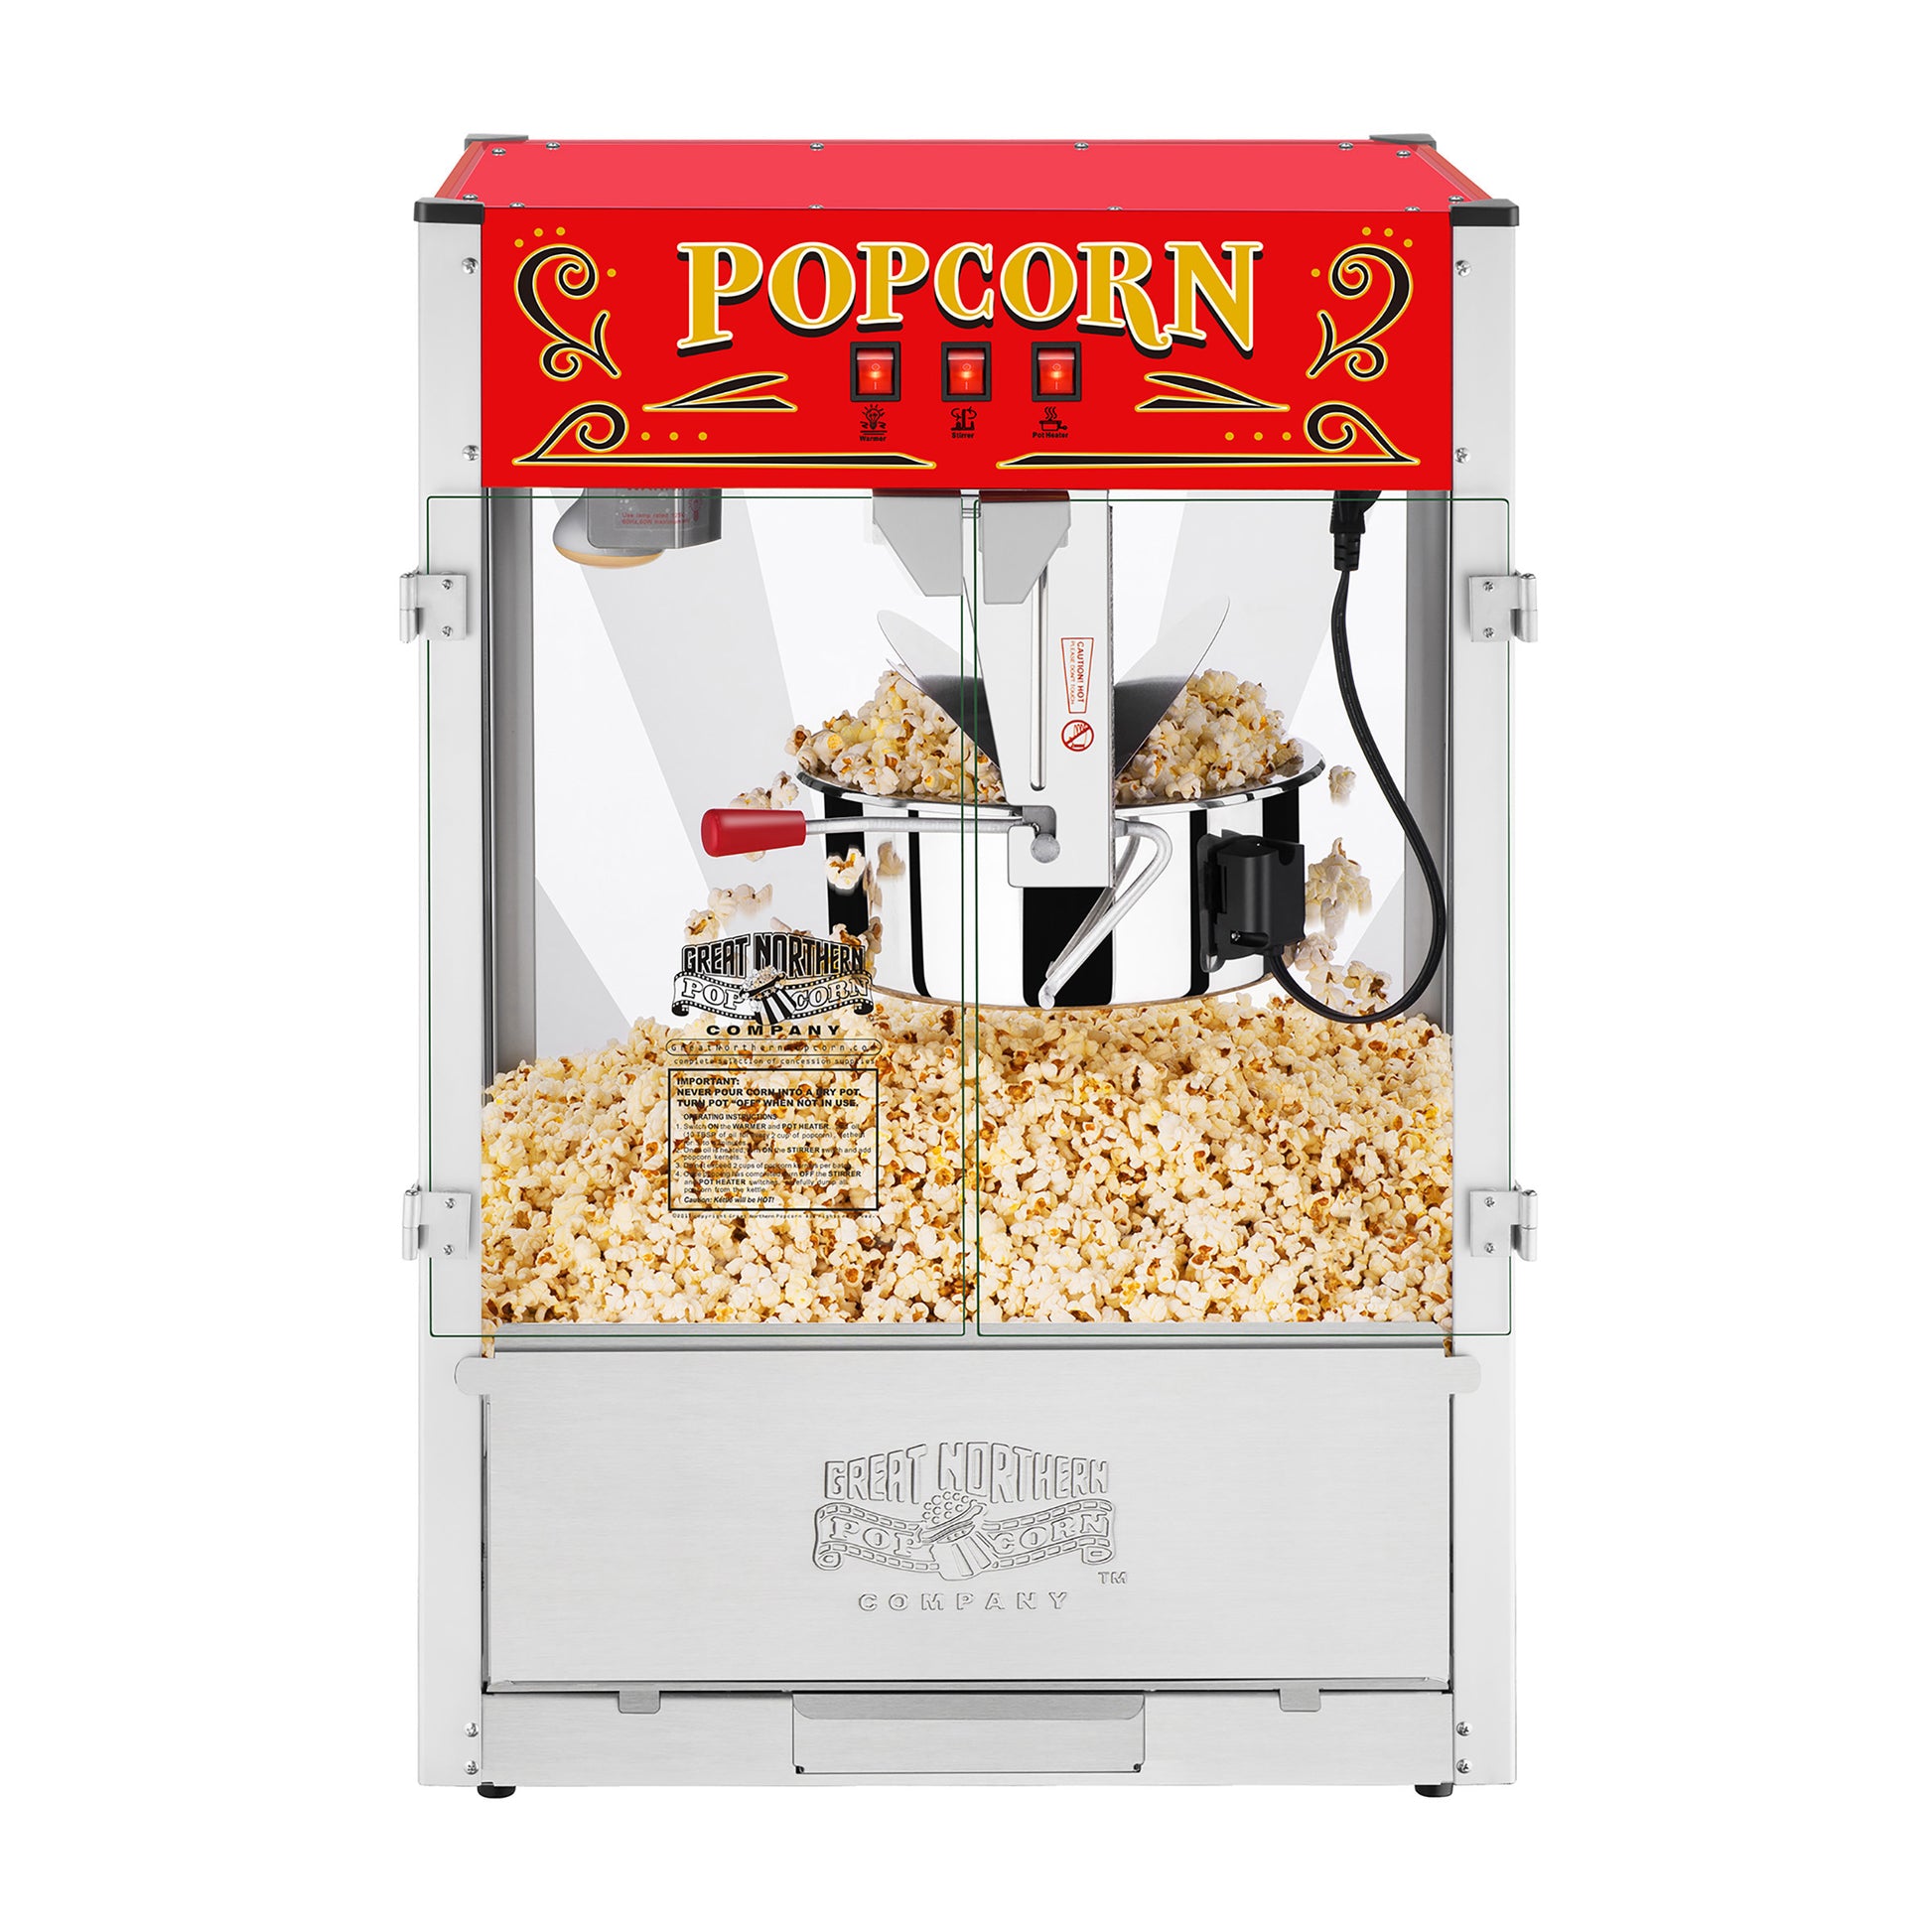 Great Northern Popcorn 0.5 Cups Oil Popcorn Machine, Red, Tabletop